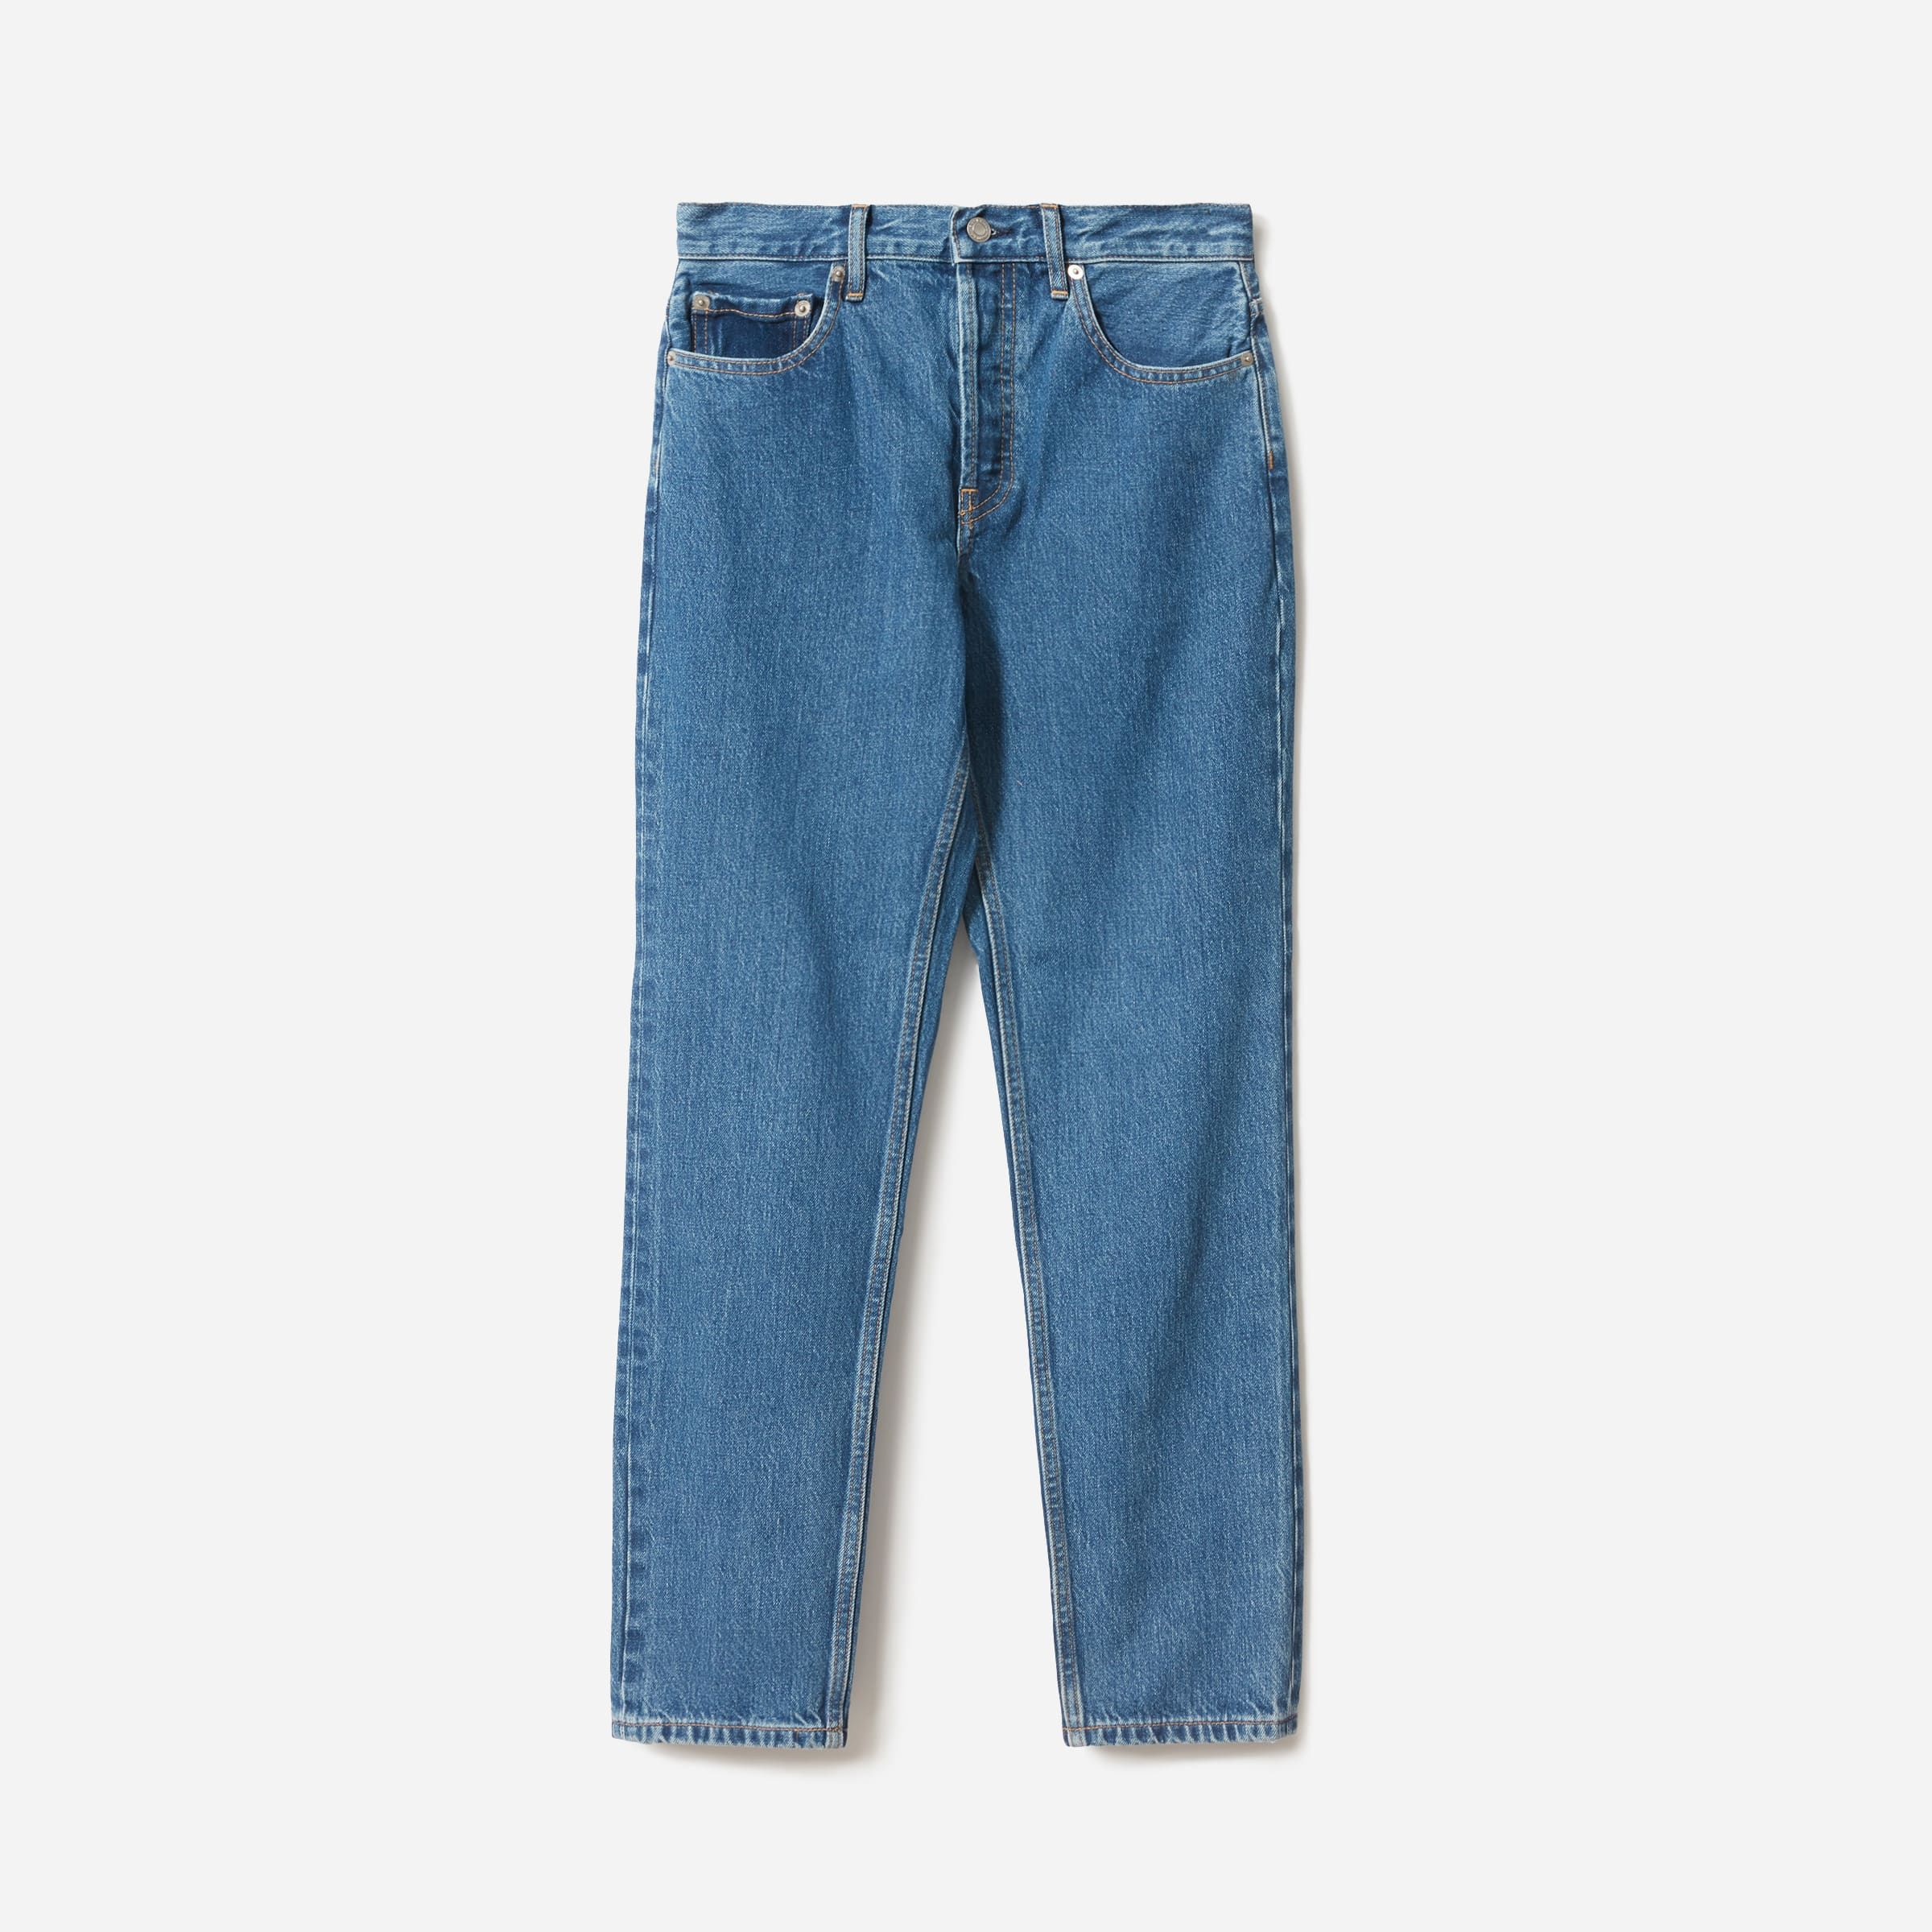 The ’90s Cheeky Jean